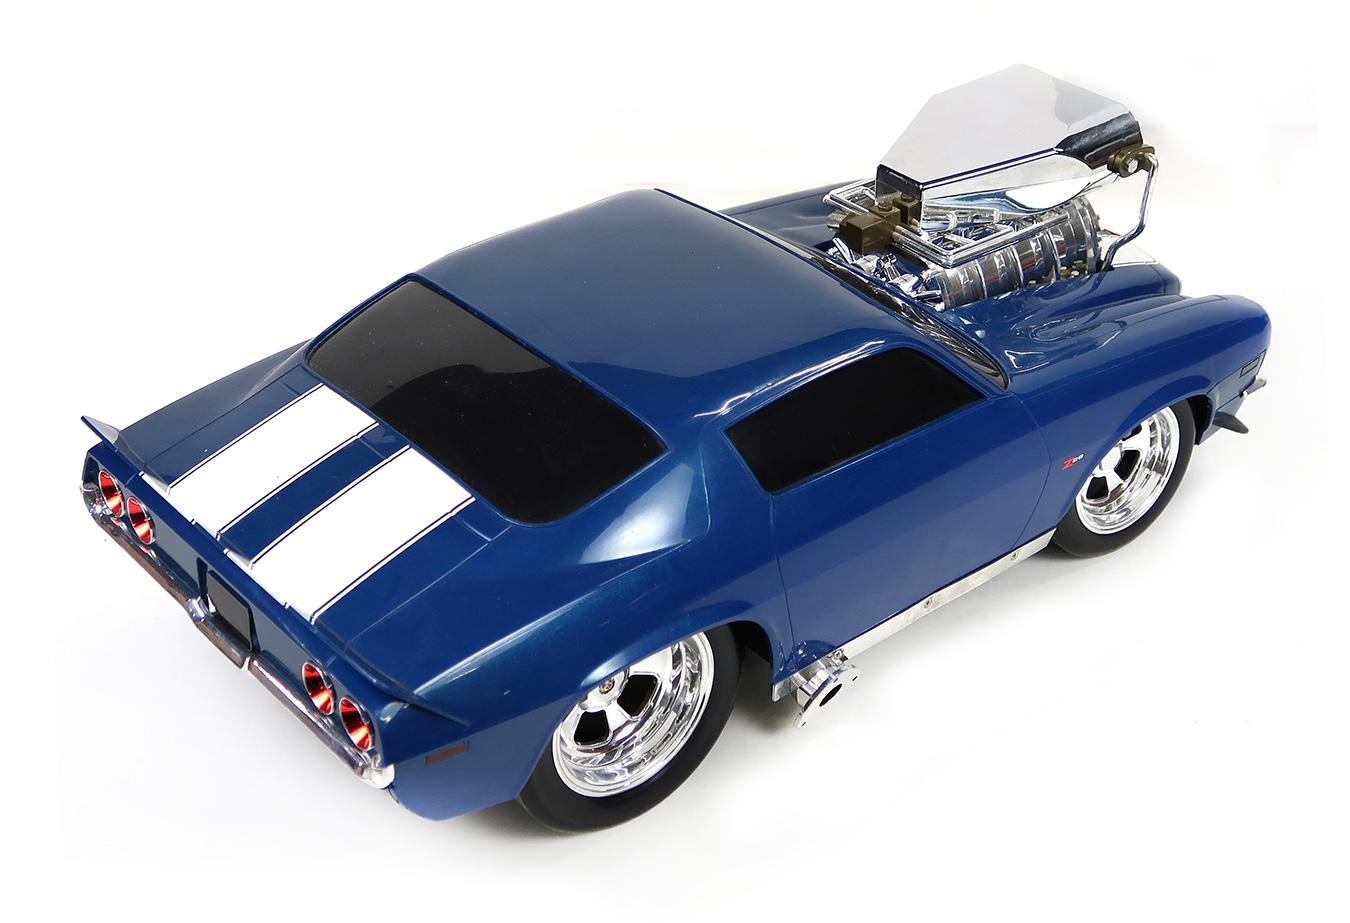 Muscle Machines Action 1971 Z28 Camaro Radio Control (RC), mfgd in 2004 for